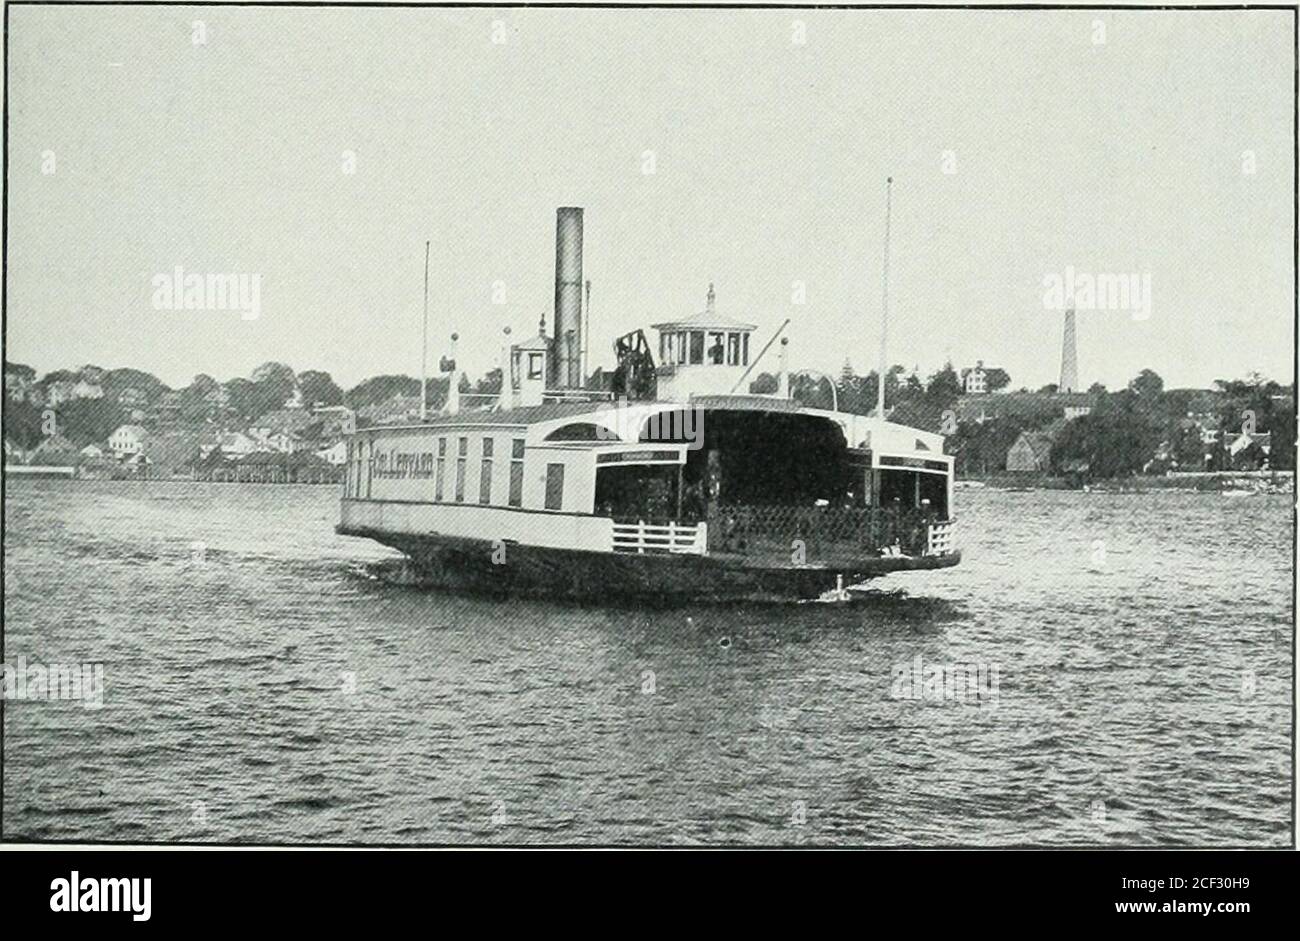 . Picturesque New London and its environs : Grofton, Mystic, Montville, Waterford, at the commencement of the twentieth century. .. THE GROTON SHORE-LOOKING ACROSS THE HARBOR FROM NEW LONDON. Showing the Fort Griswold Monument on Groton Heights in the Right Background, and in the Foregroundthe Ferryboat. Colonel Lcdyard. which Plies Between New London and Groton. 13 Ipicturcsque 1Rcw London. The town possessed ?• chaiacters in its early days, and of many andvaried kinds they were, tlie ]{ogerrnes,for instance, who were continually introuble with the constituted author-ities, and no sooner out Stock Photo